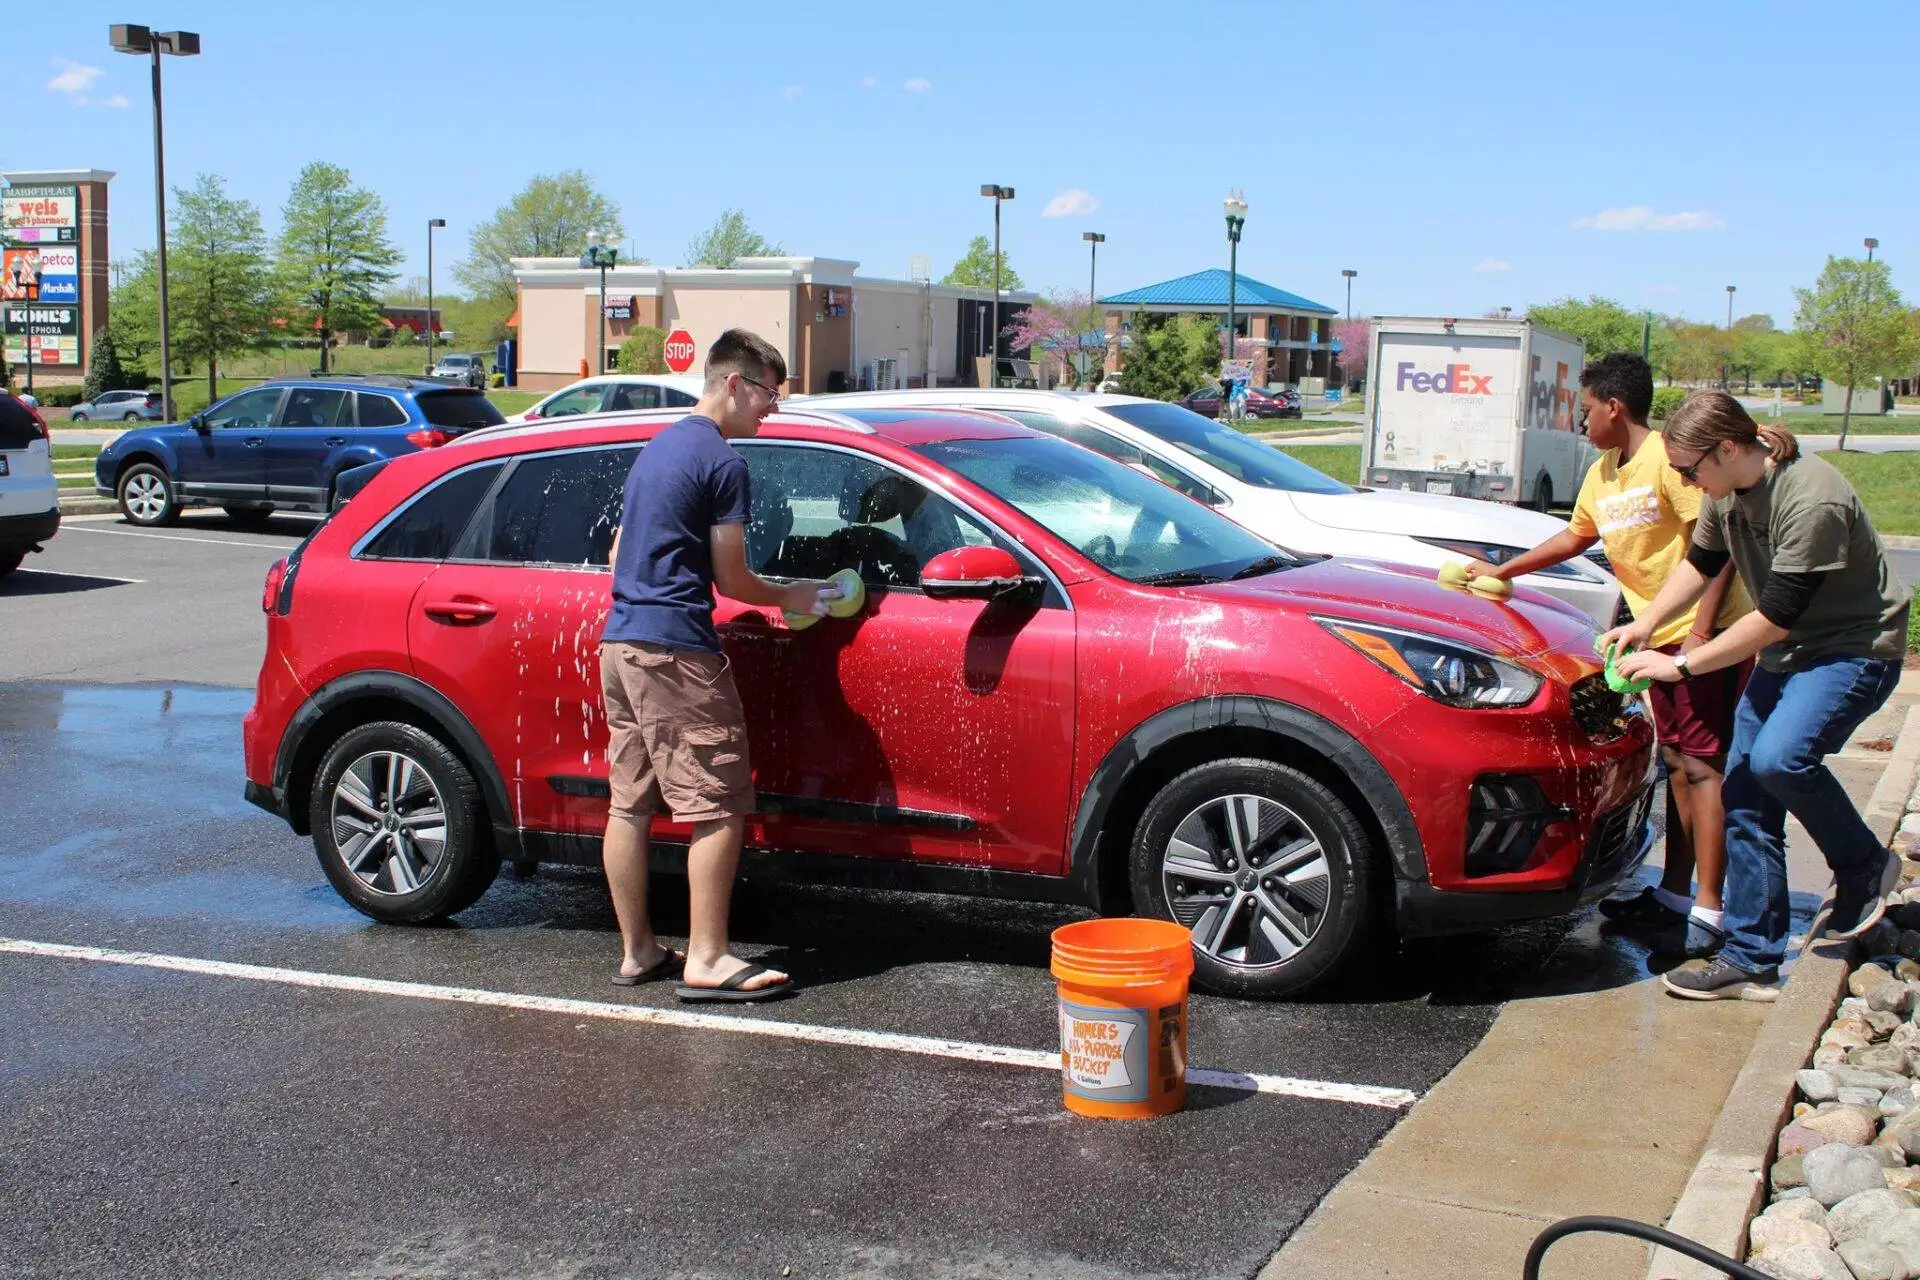 Three people washing a red suv in a sunny parking lot, using buckets and sponges.